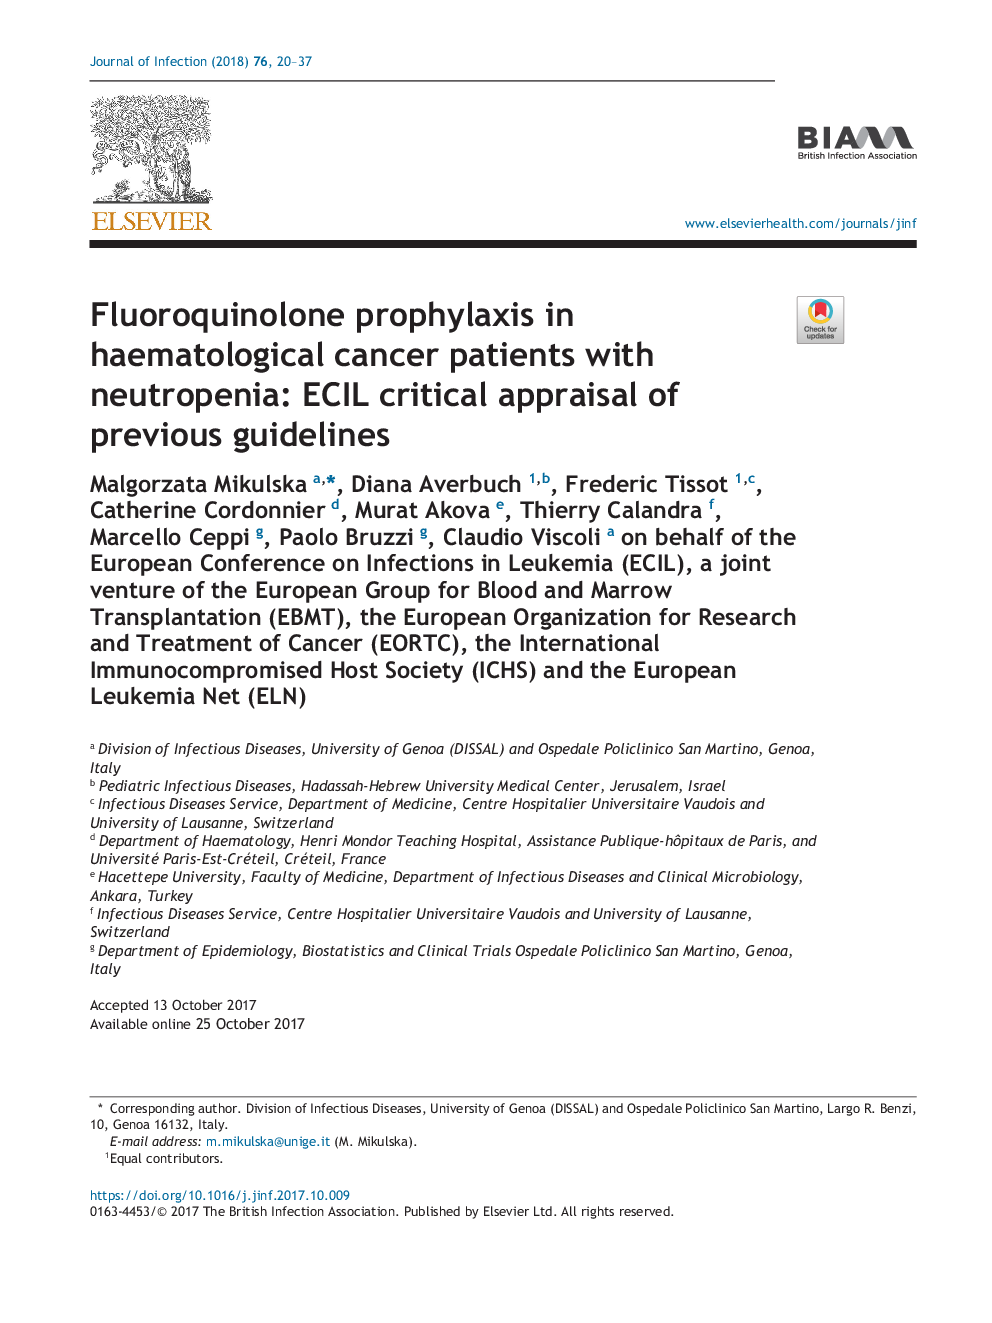 Fluoroquinolone prophylaxis in haematological cancer patients with neutropenia: ECIL critical appraisal of previous guidelines